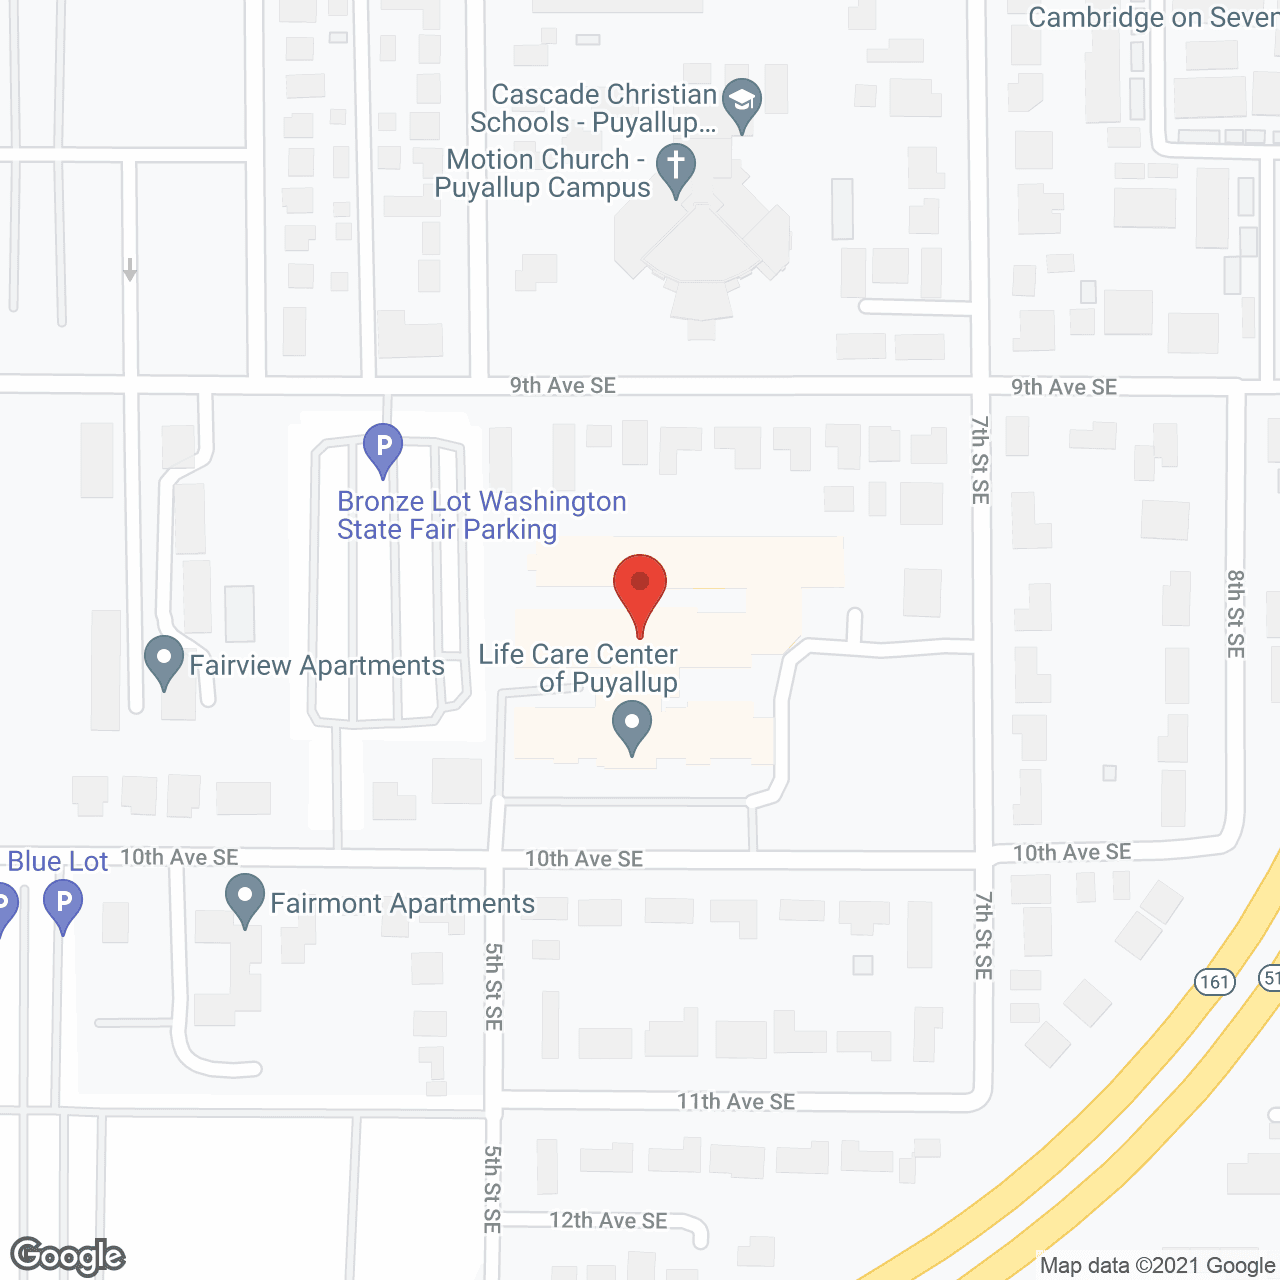 Life Care Center of Puyallup in google map